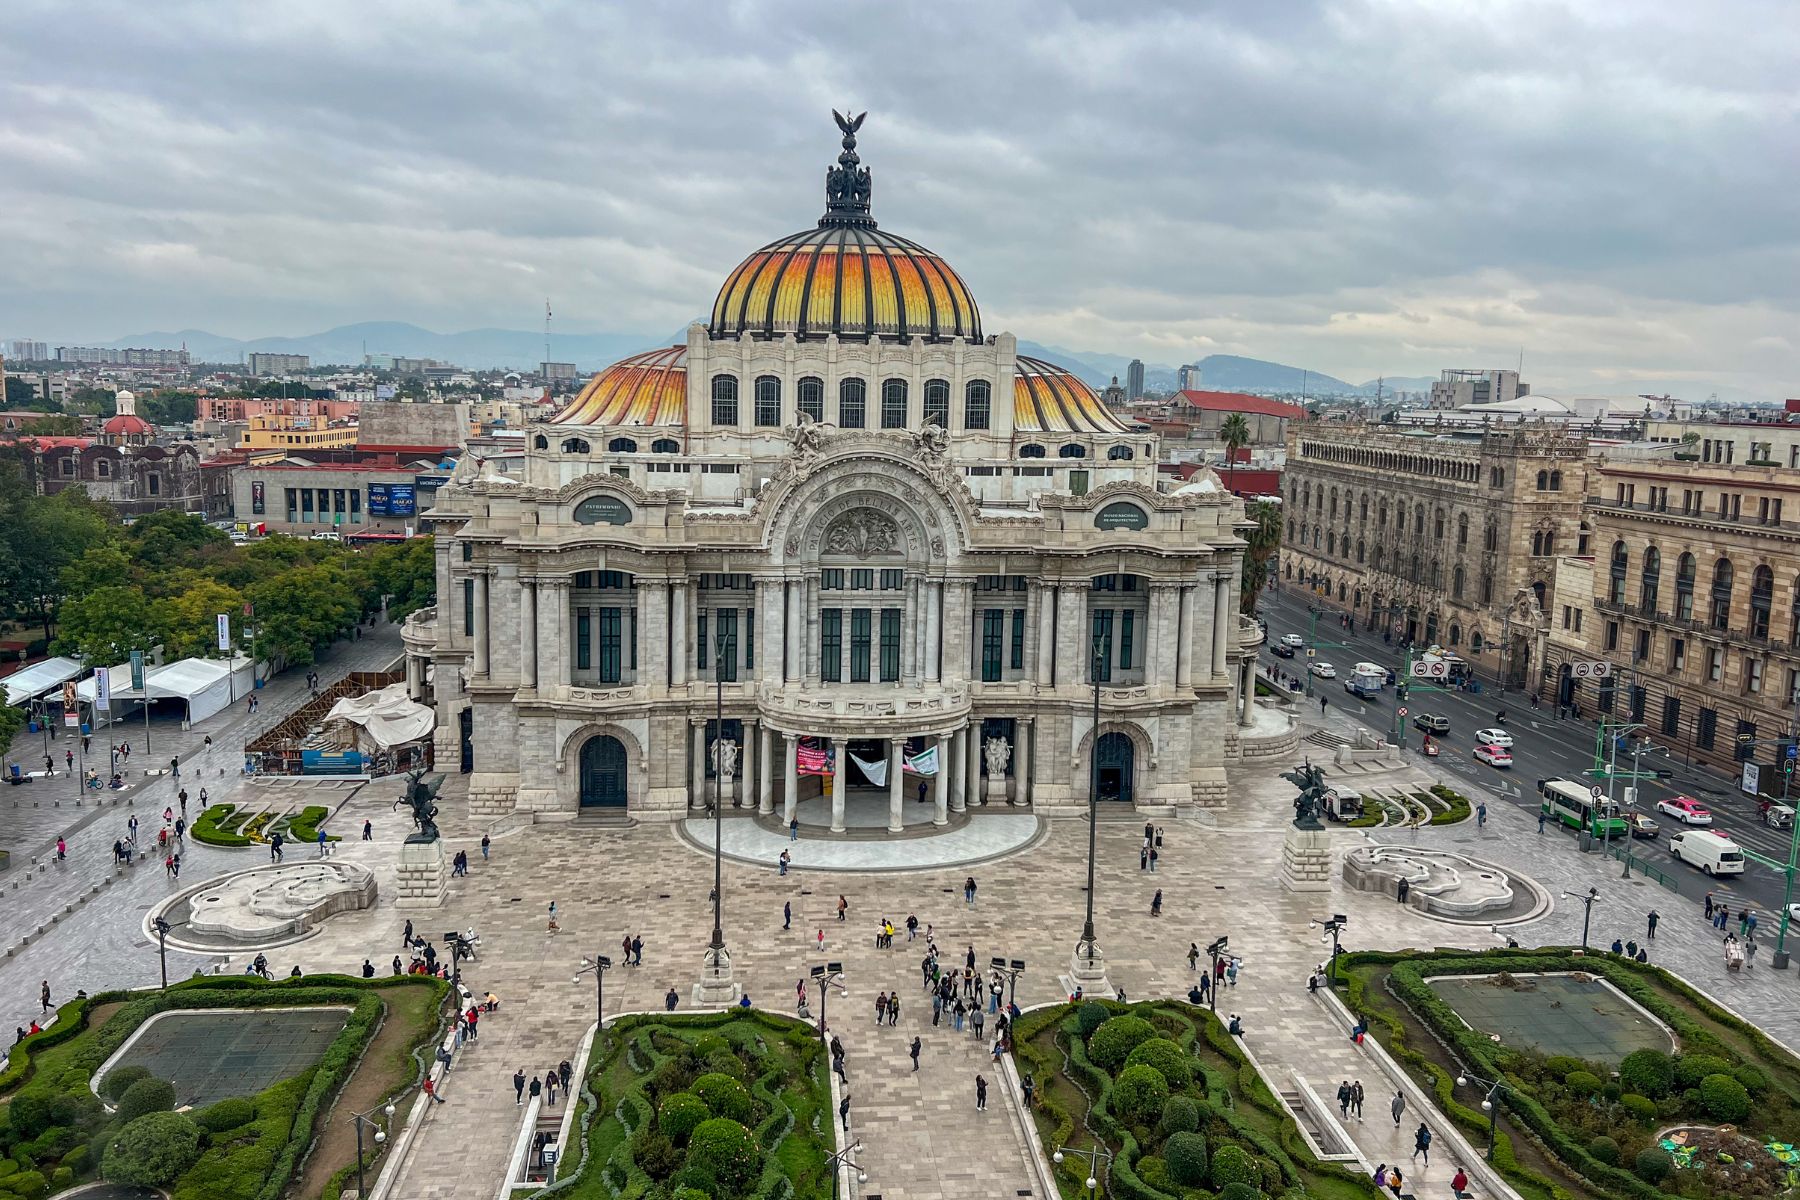 View from the Sears department store overlooking the Palacio De Bellas Artes and parque alameda central, with a gorgeous art deco interior, and works from Deigo.